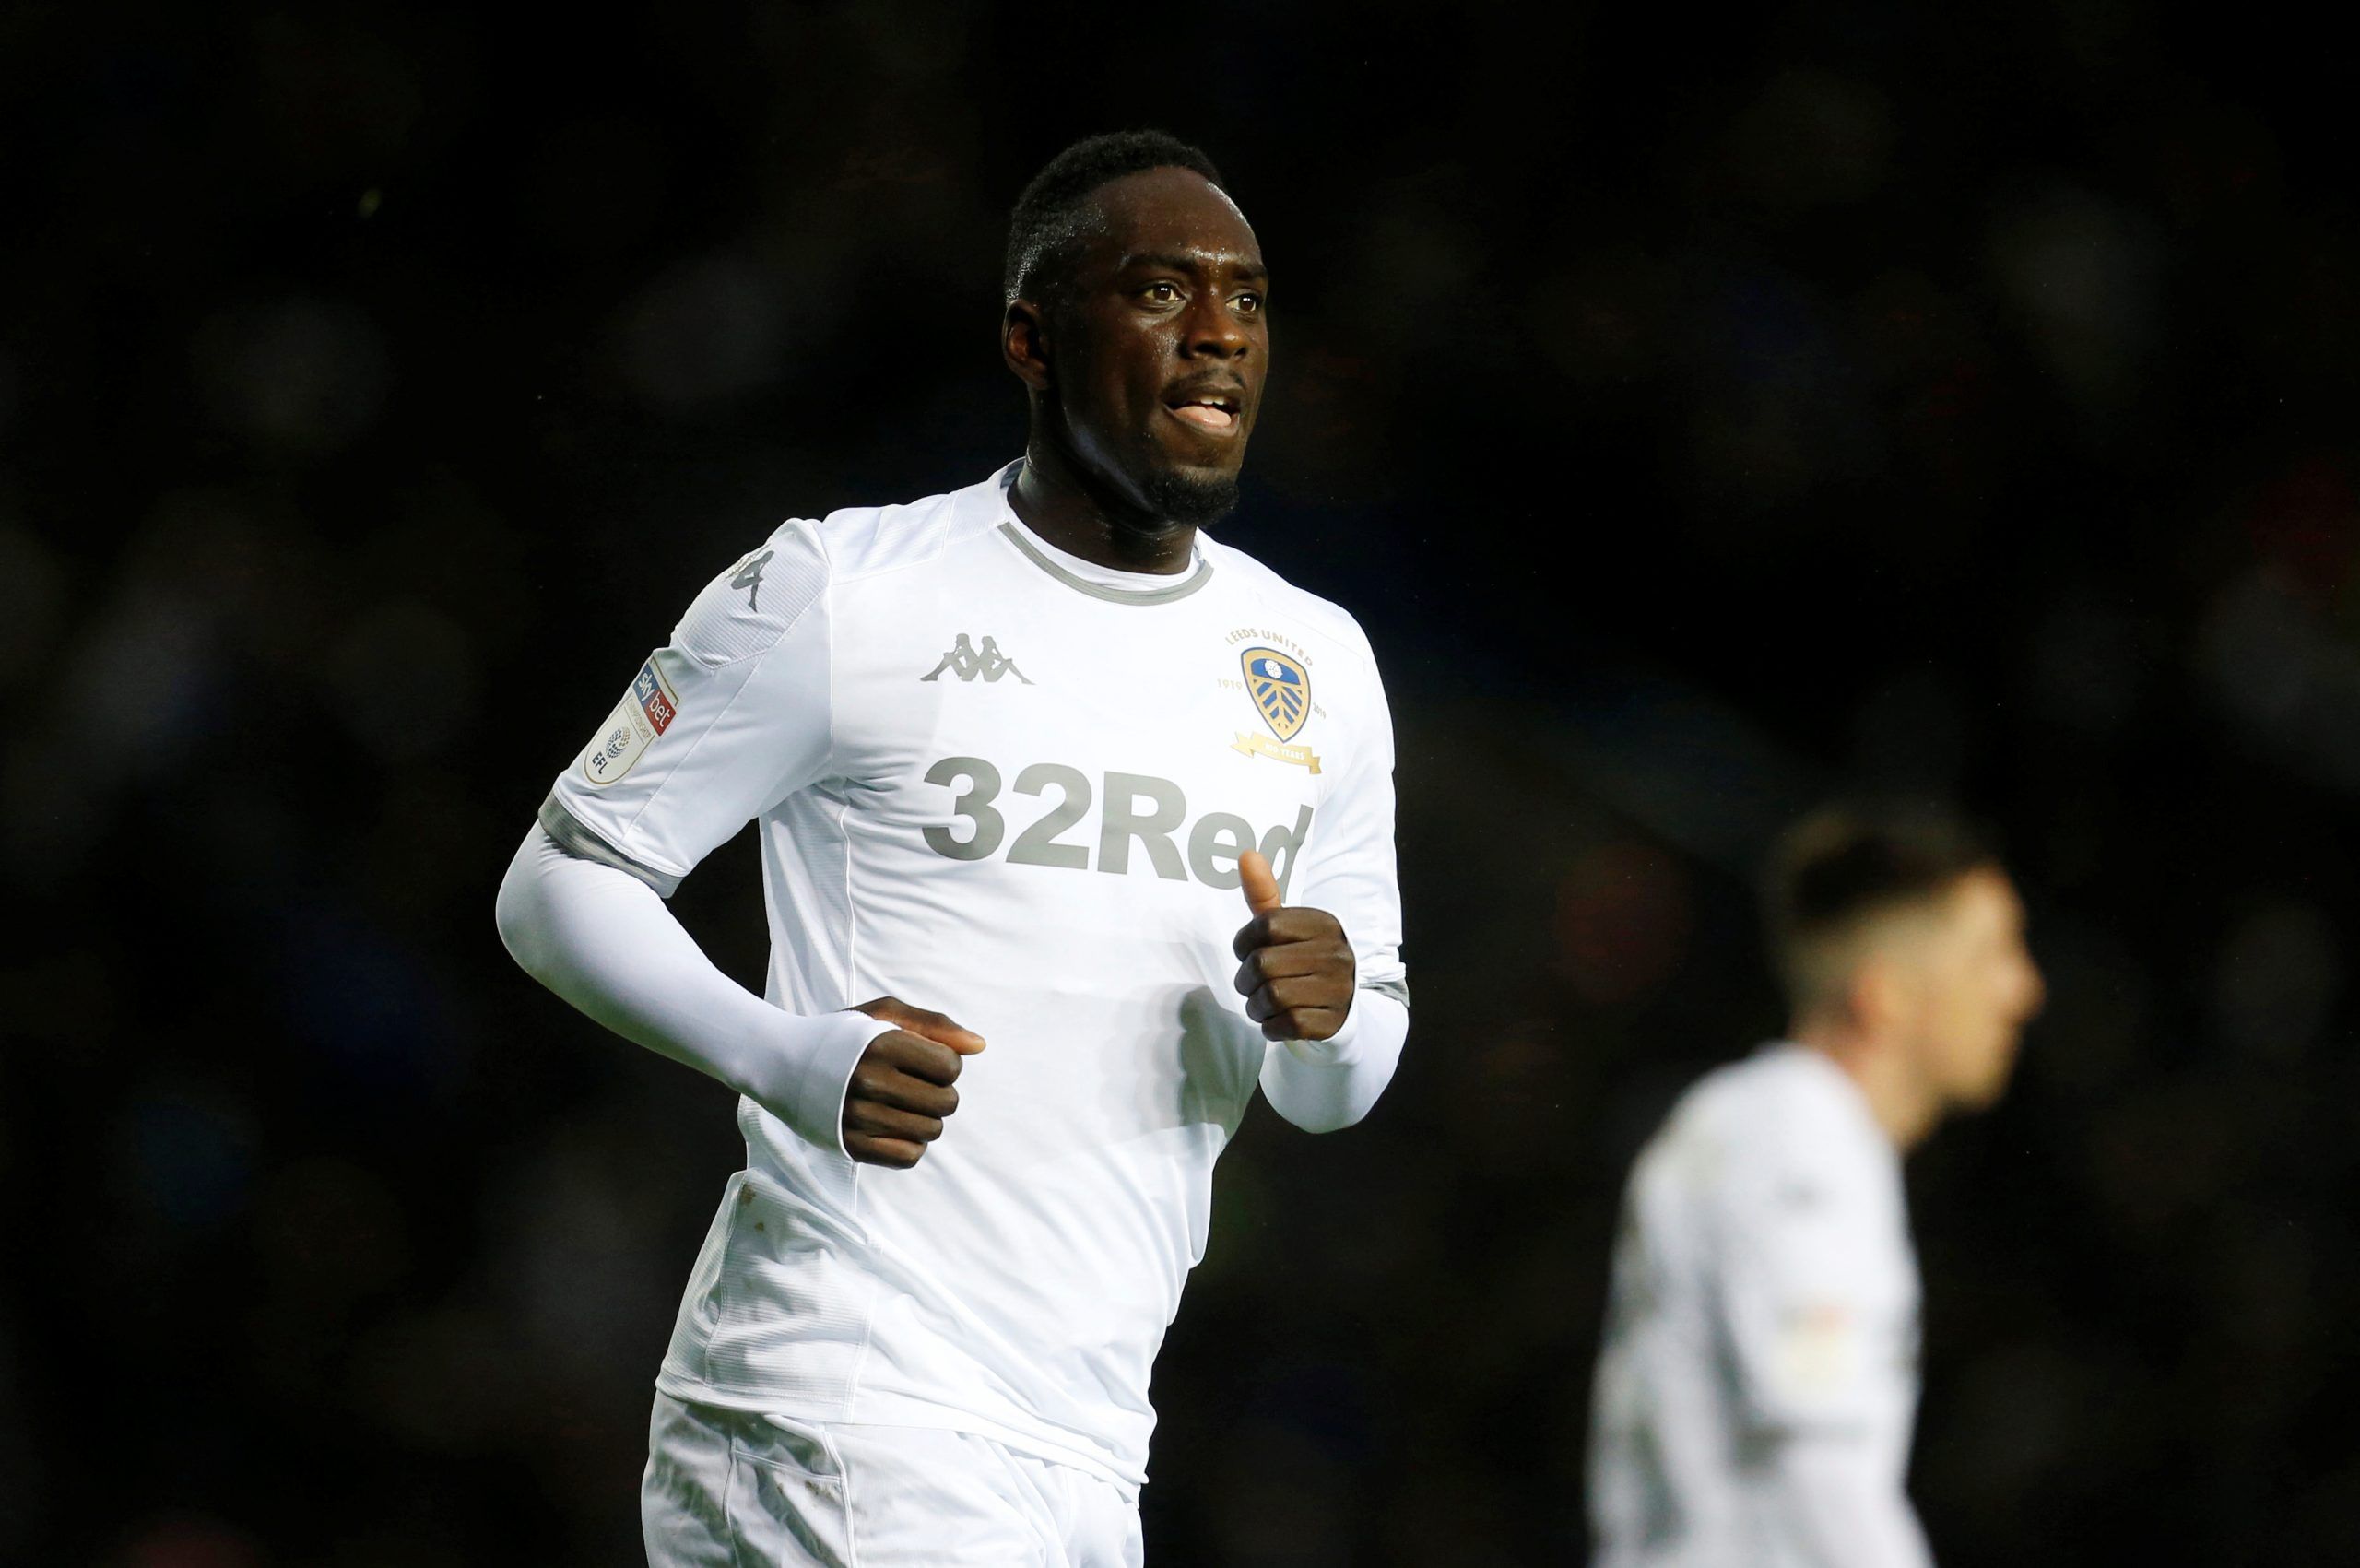 Soccer Football - Championship - Leeds United v Bristol City - Elland Road, Leeds, Britain - February 15, 2020  Leeds United's Jean-Kevin Augustin  Action Images/Ed Sykes  EDITORIAL USE ONLY. No use with unauthorized audio, video, data, fixture lists, club/league logos or 